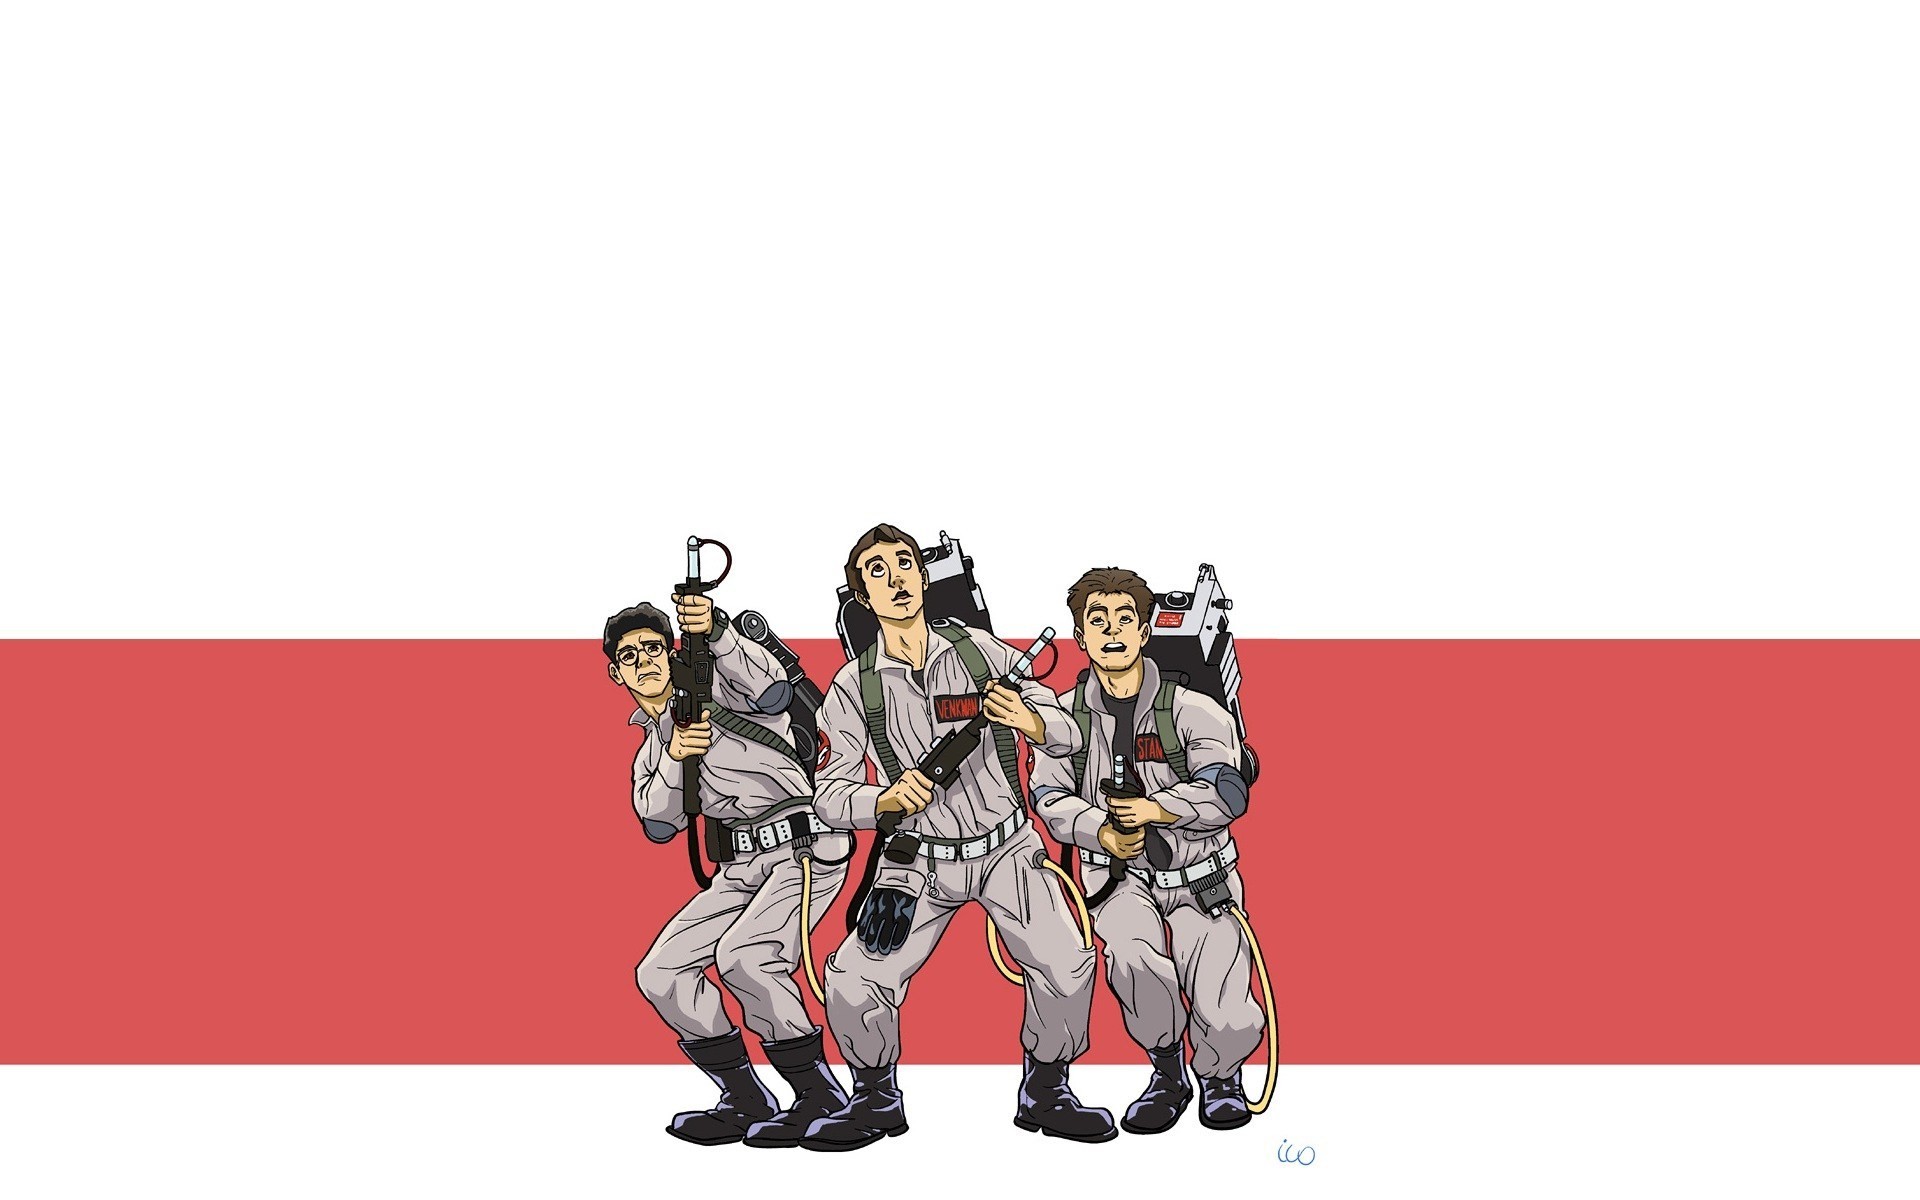 1920x1200 widescreen wallpaper ghostbusters - ghostbusters category